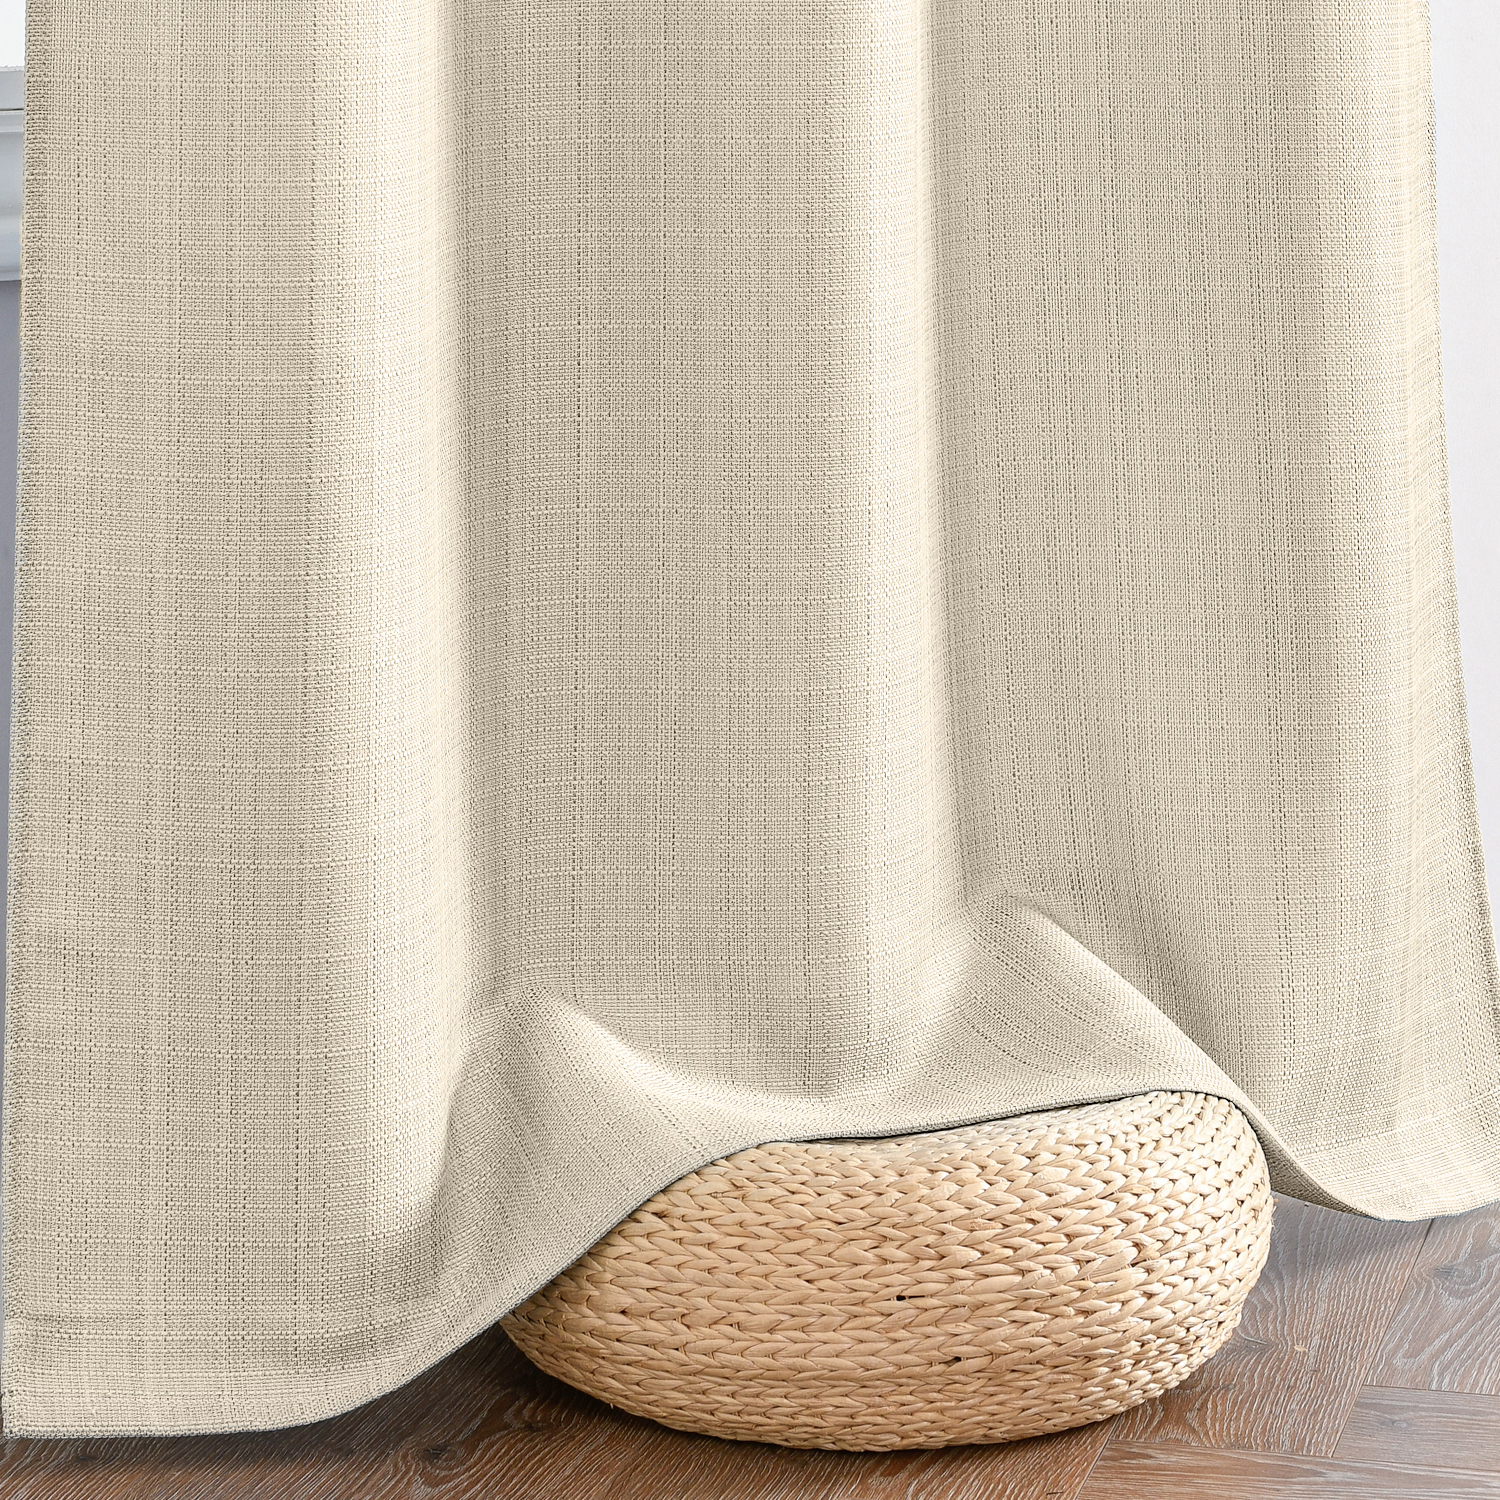 Curtainking Heathered Beige Curtains for Living Room 63 Inches Linen Textured Curtains Light Filtering Back Tab Curtains Casual Weave Back Tab Drapes 2 Panels - image 4 of 8